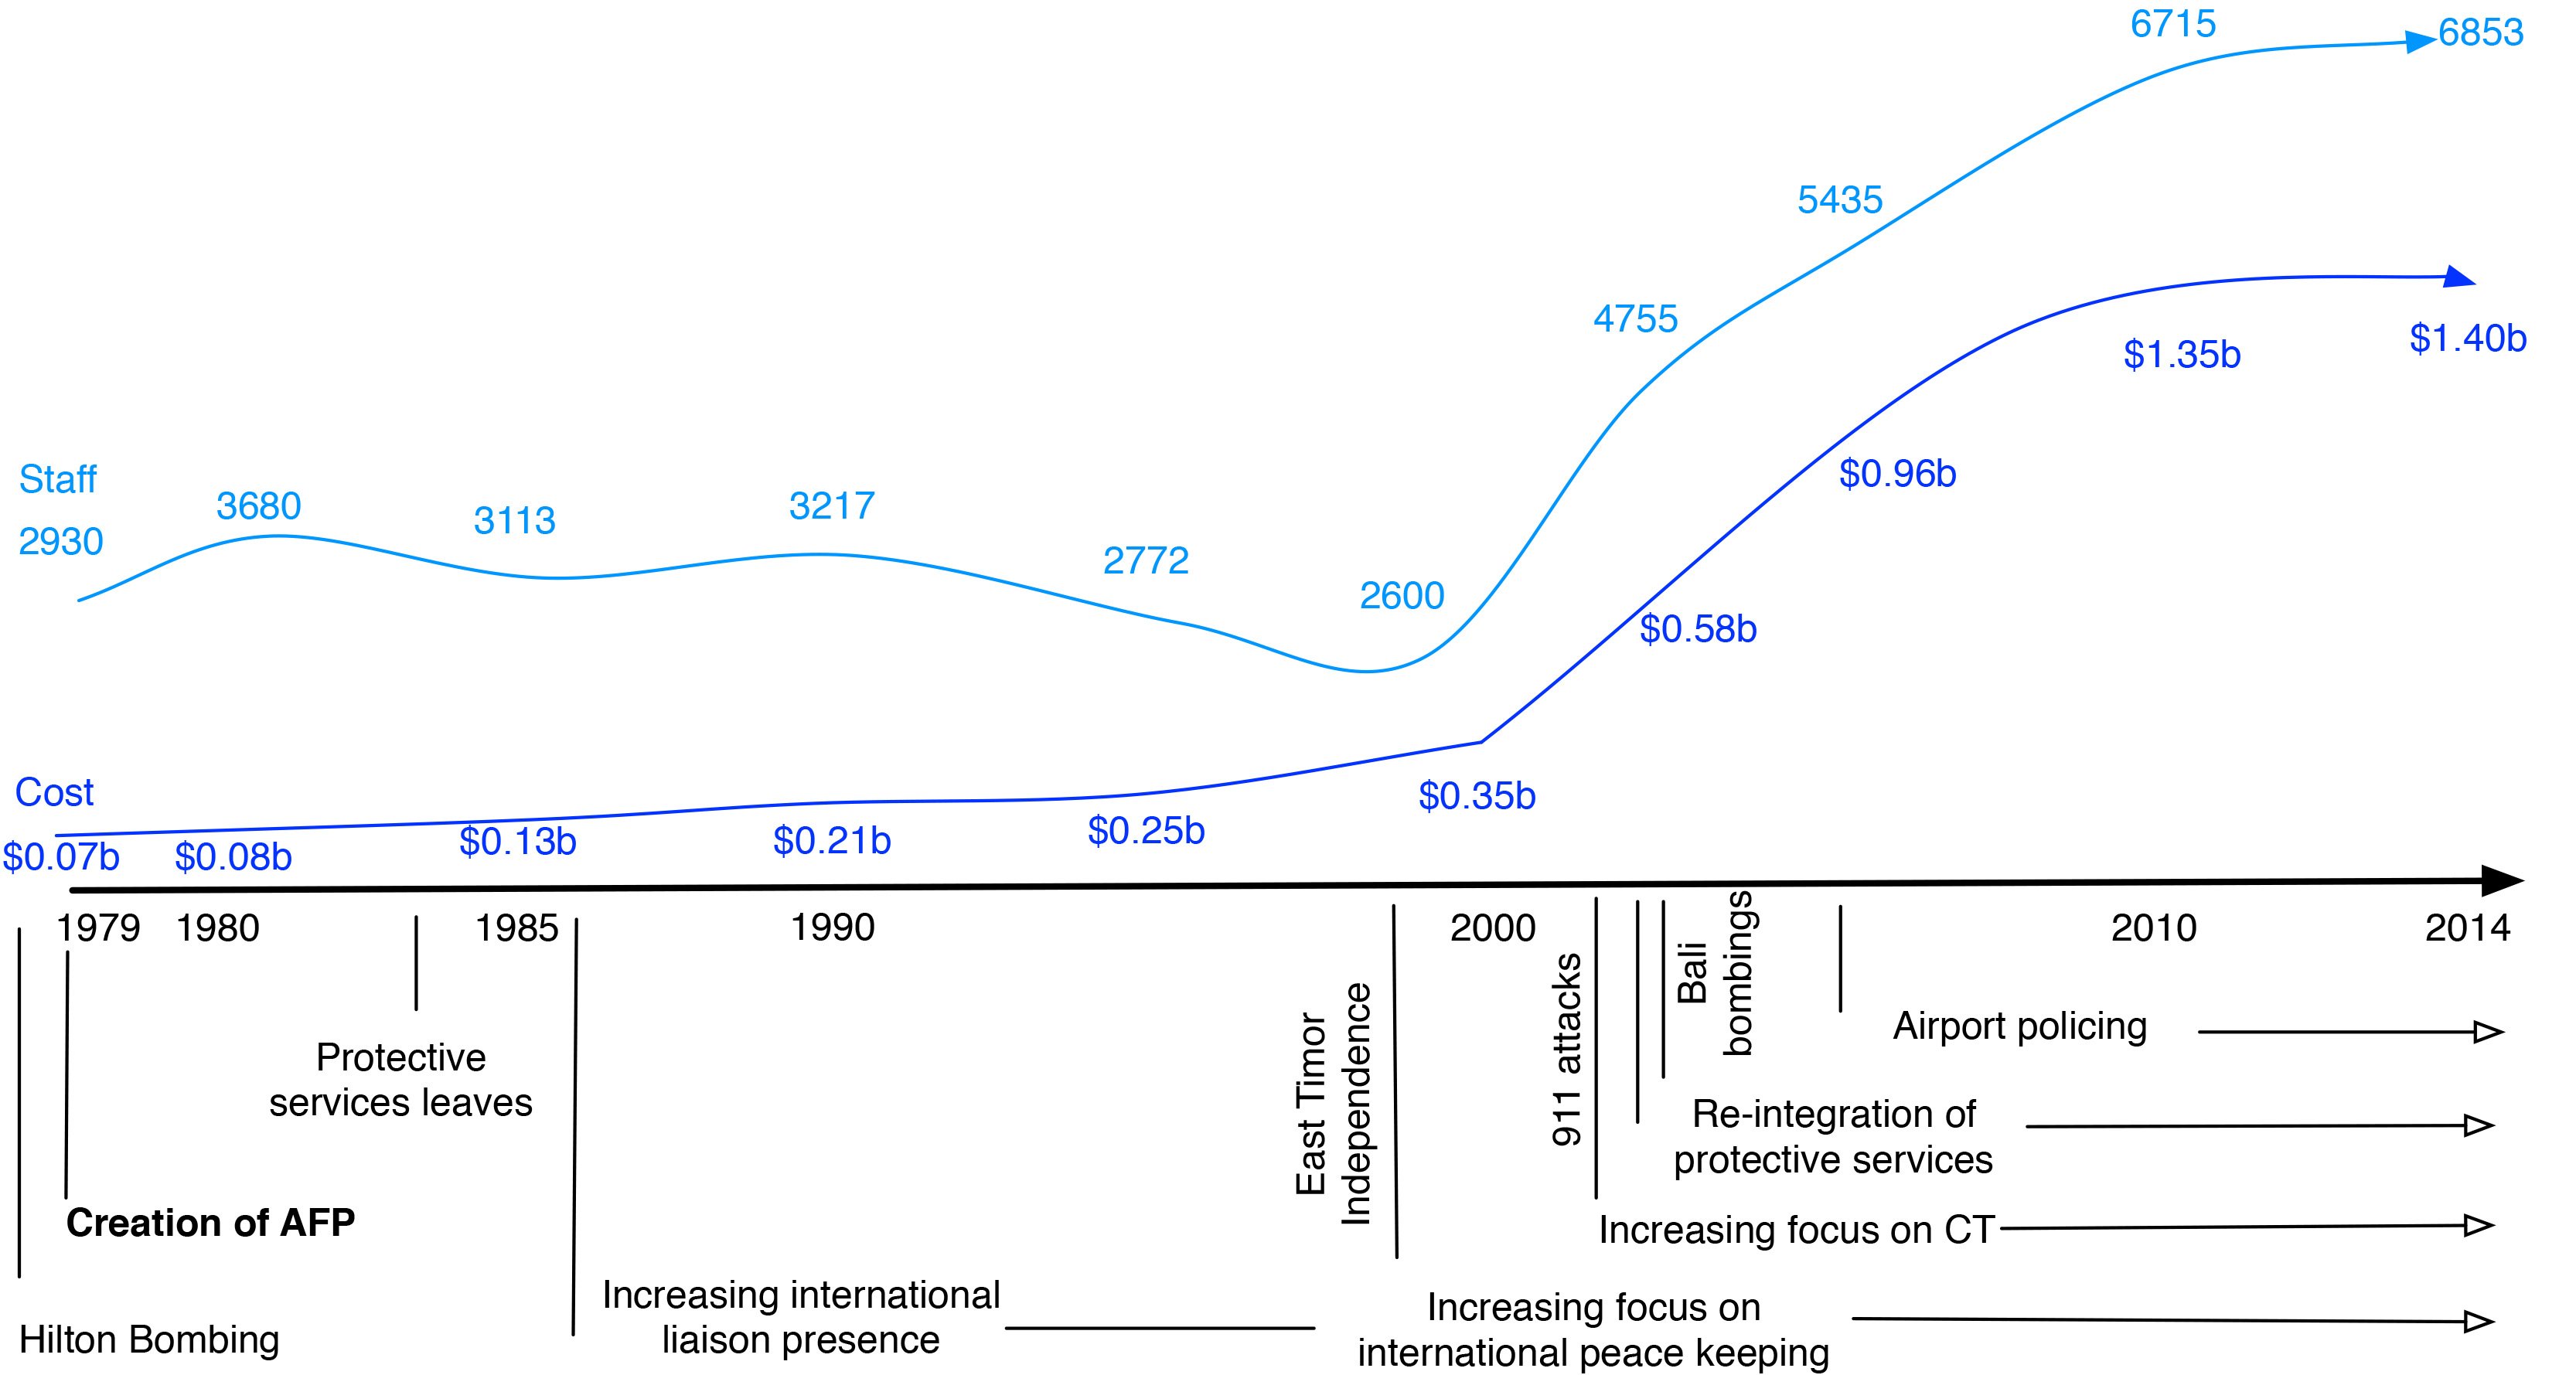 Figure 1 – Time line and graph showing the expansion of AFP staff numbers and AFP costs from 1979 when the AFP was created to the present (2014).